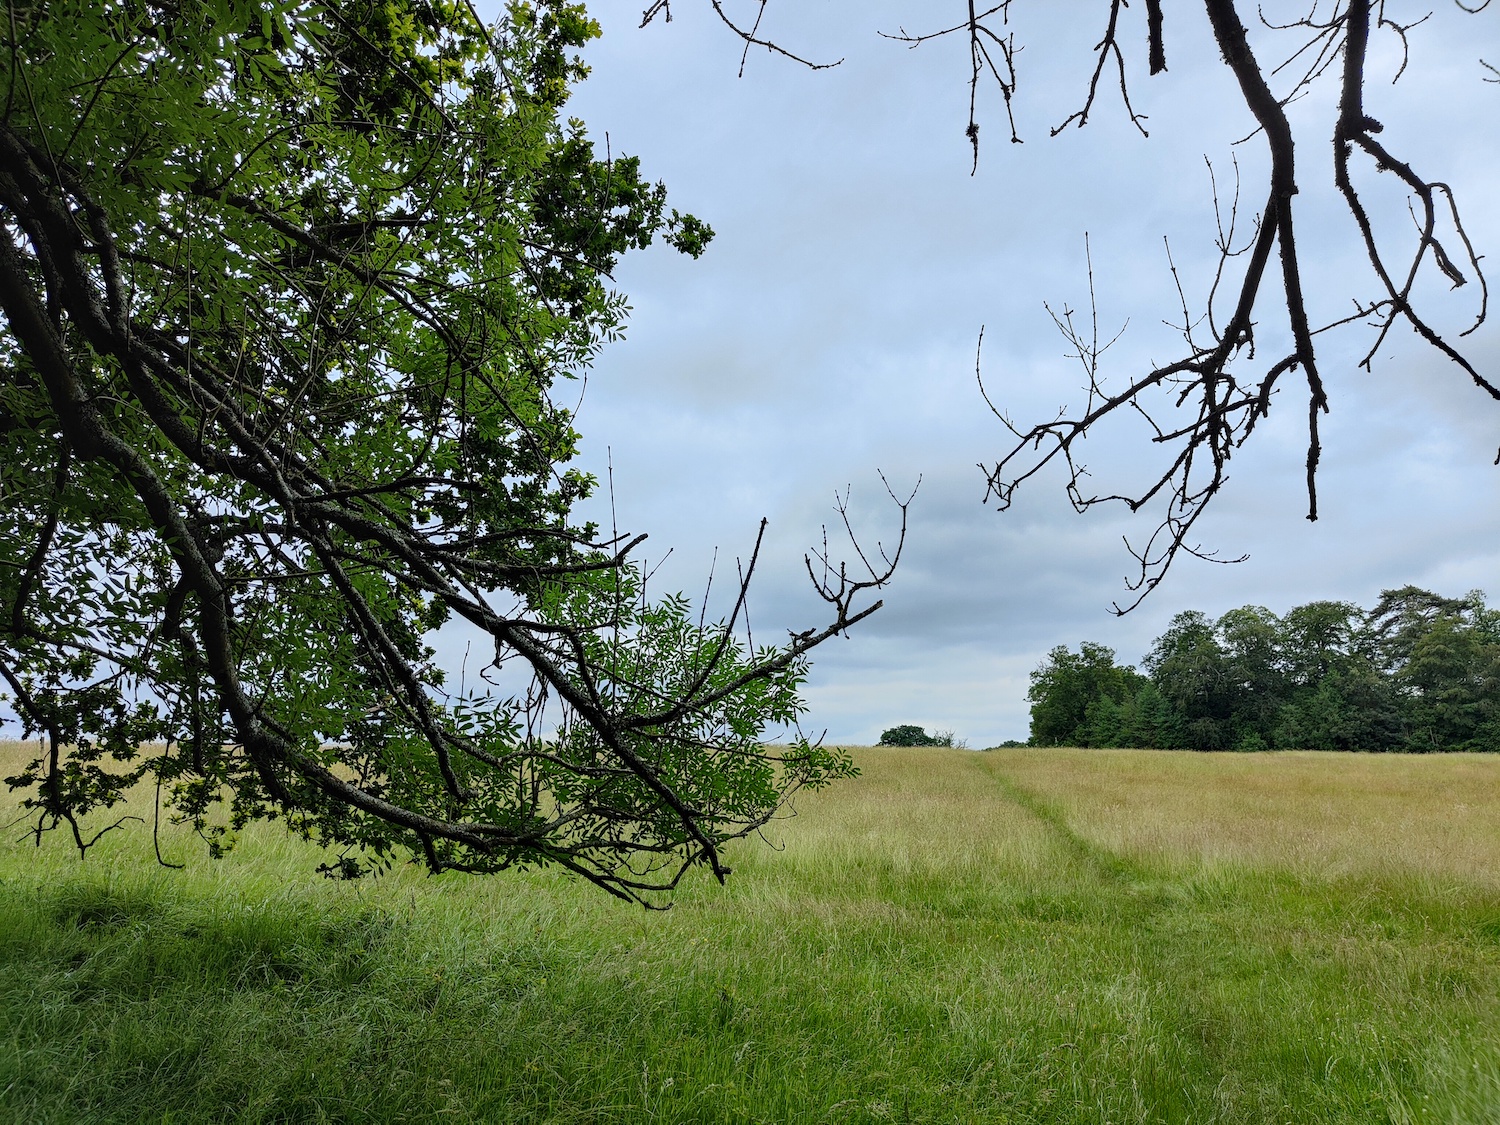 Photo of a field and trees taken with the Oppo Find X3 Pro